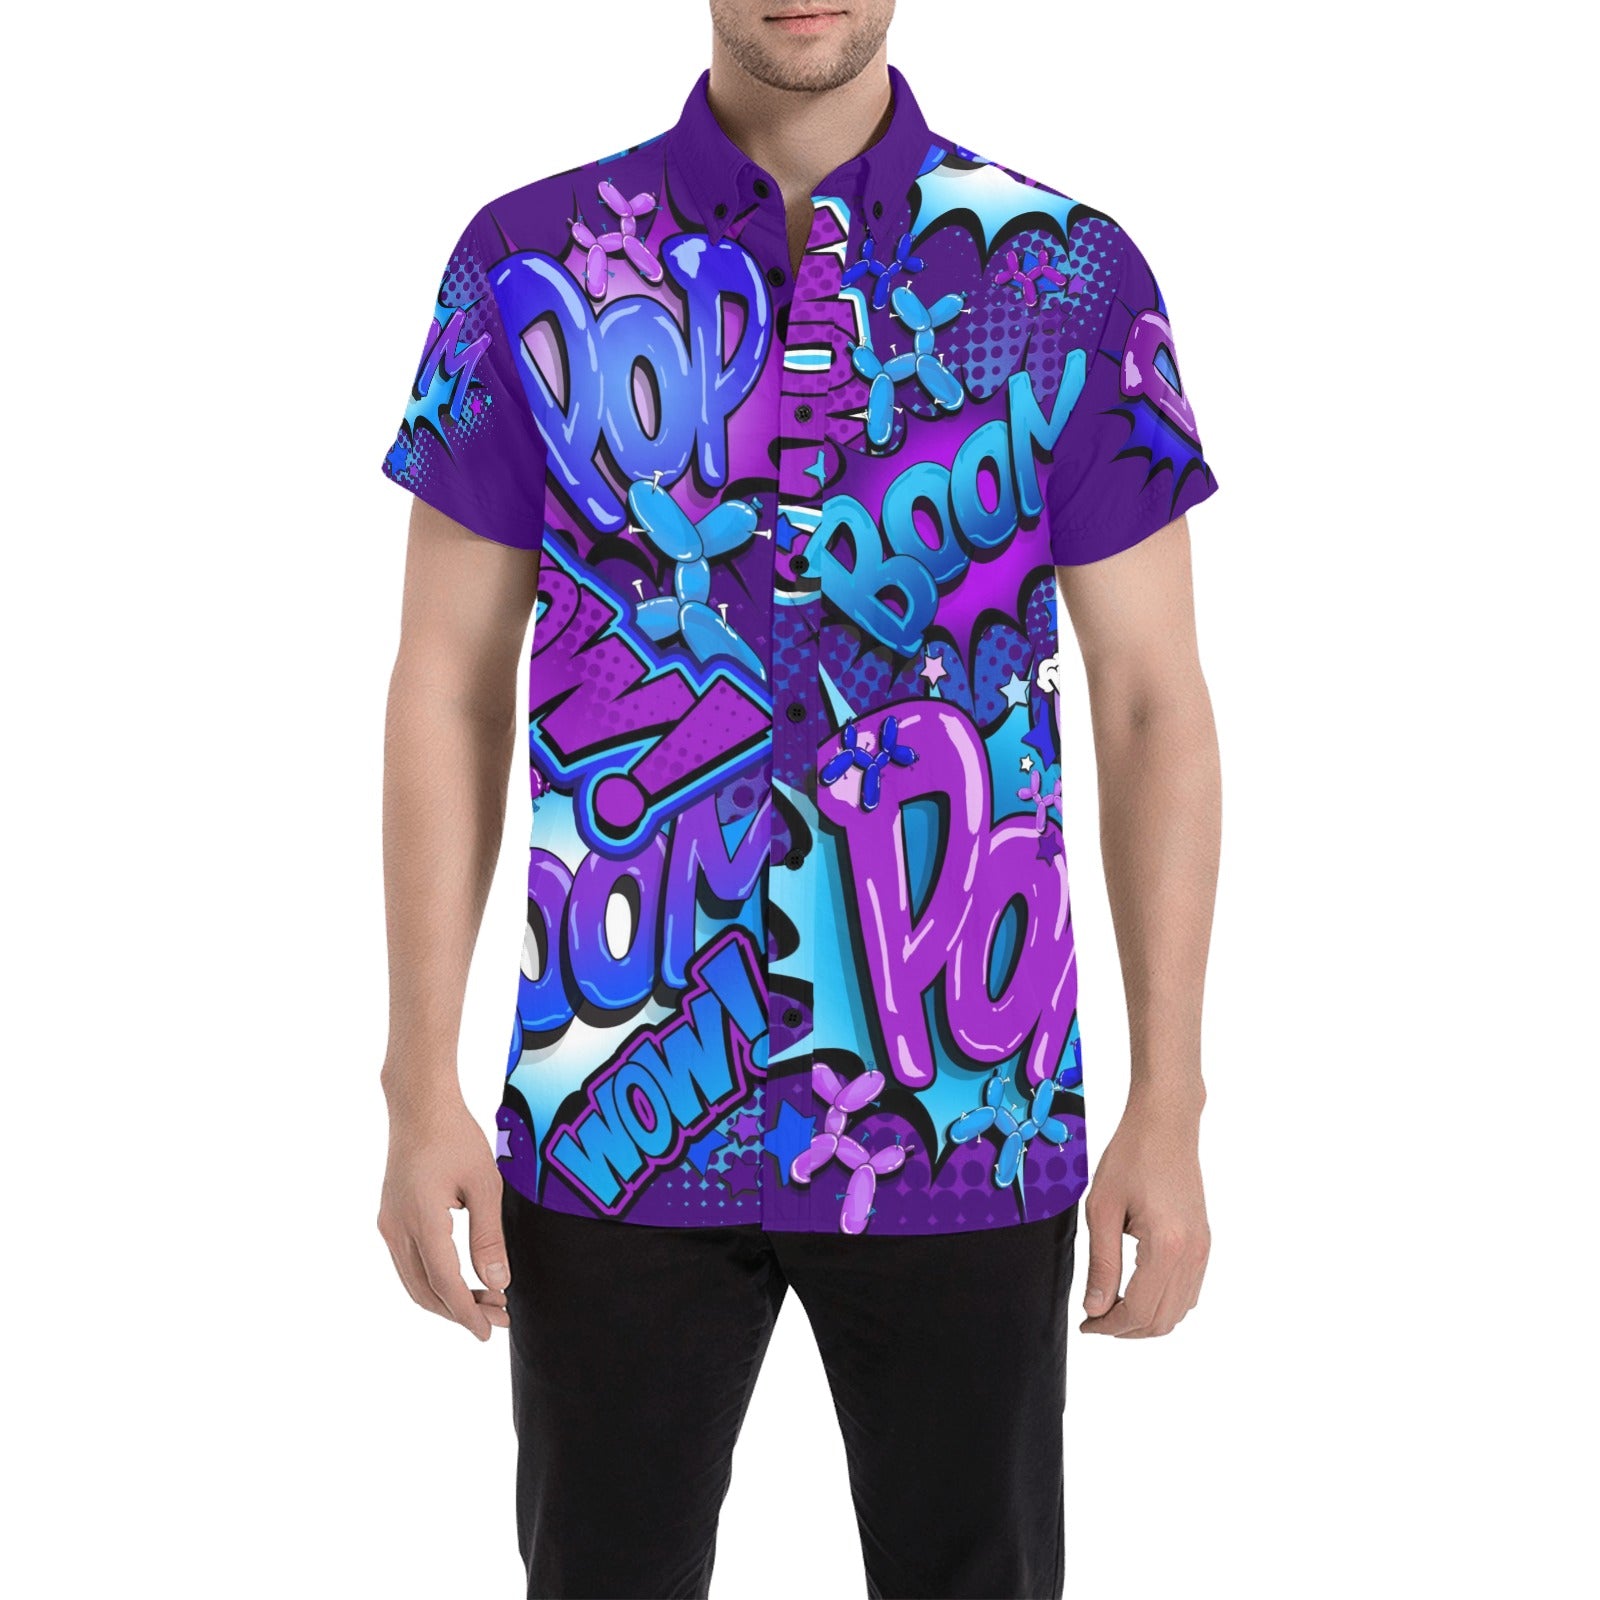 Balloon Twister shirt in blue and purple Balloon Artist Clothing 